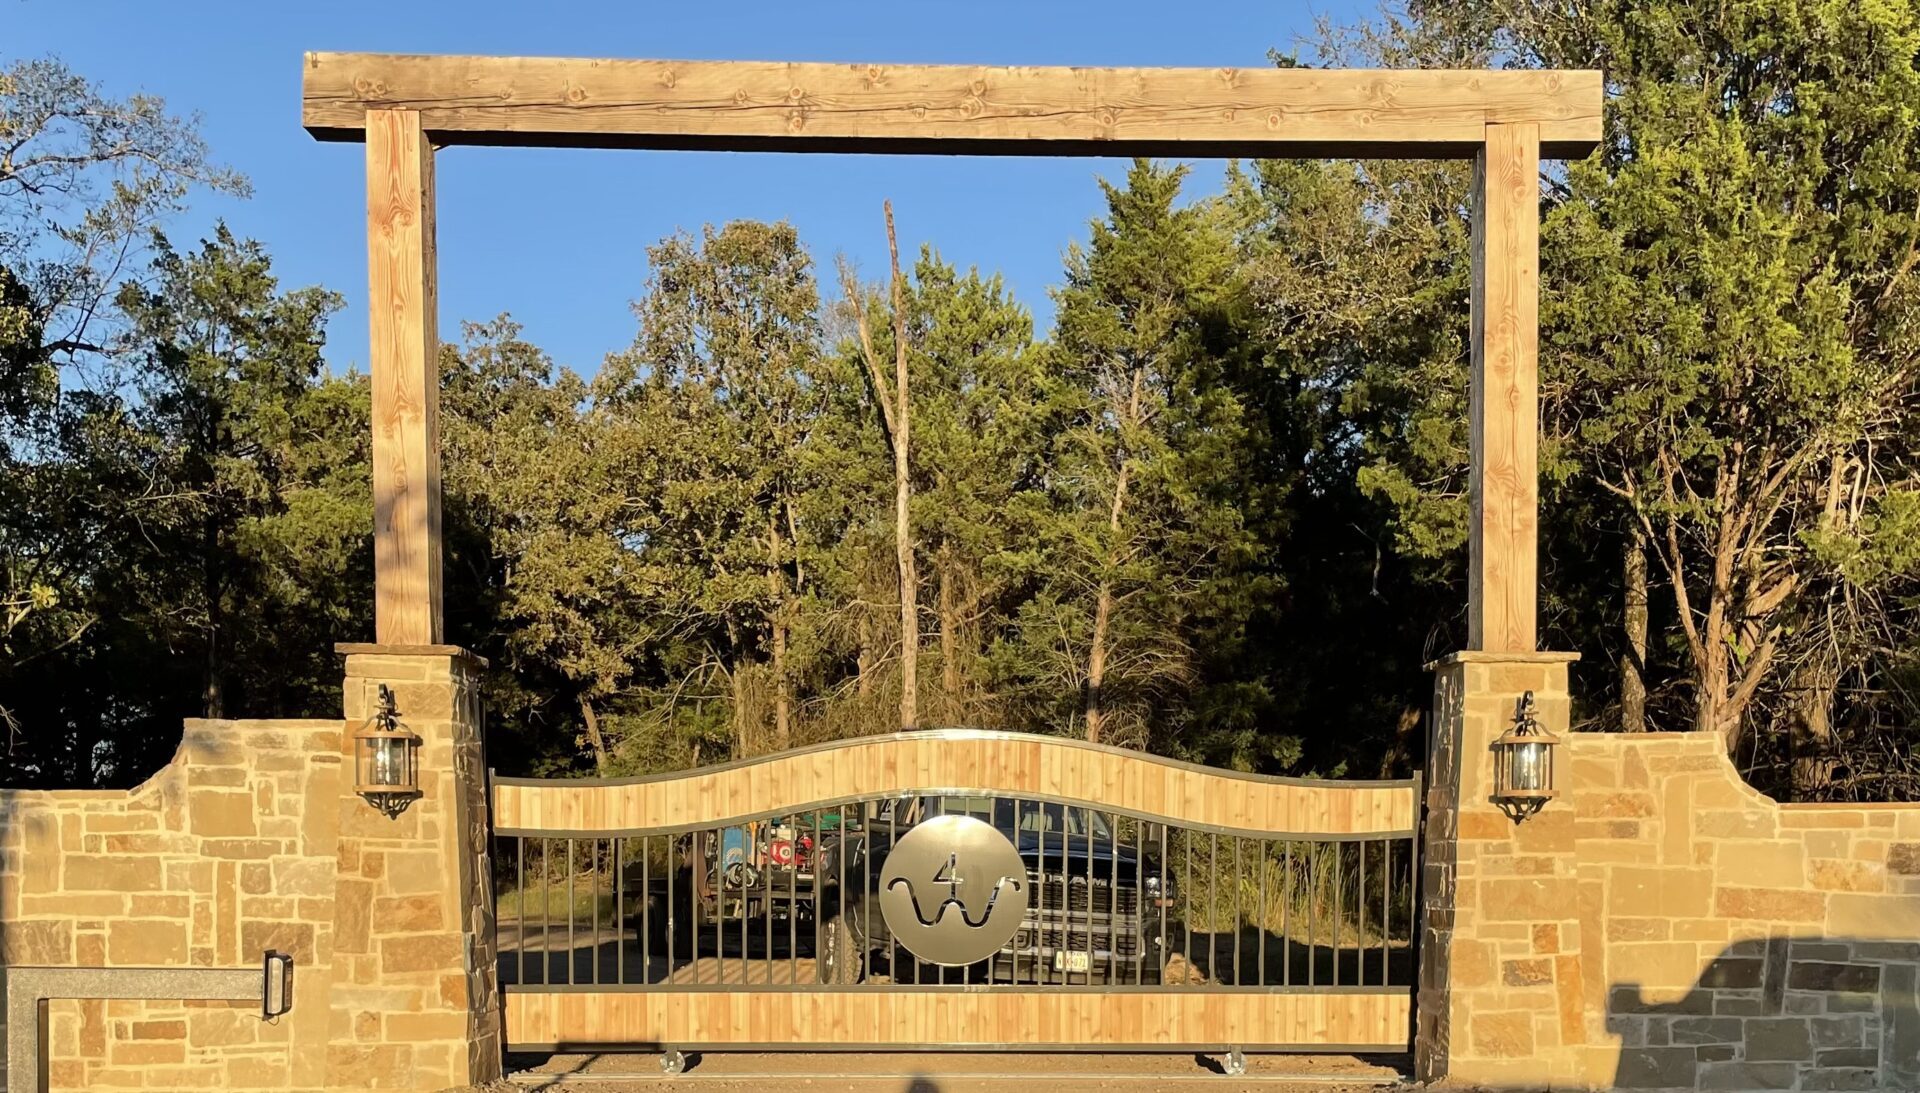 A gate with a sign reading "The Ranch" welcomes visitors to a serene and picturesque countryside retreat.